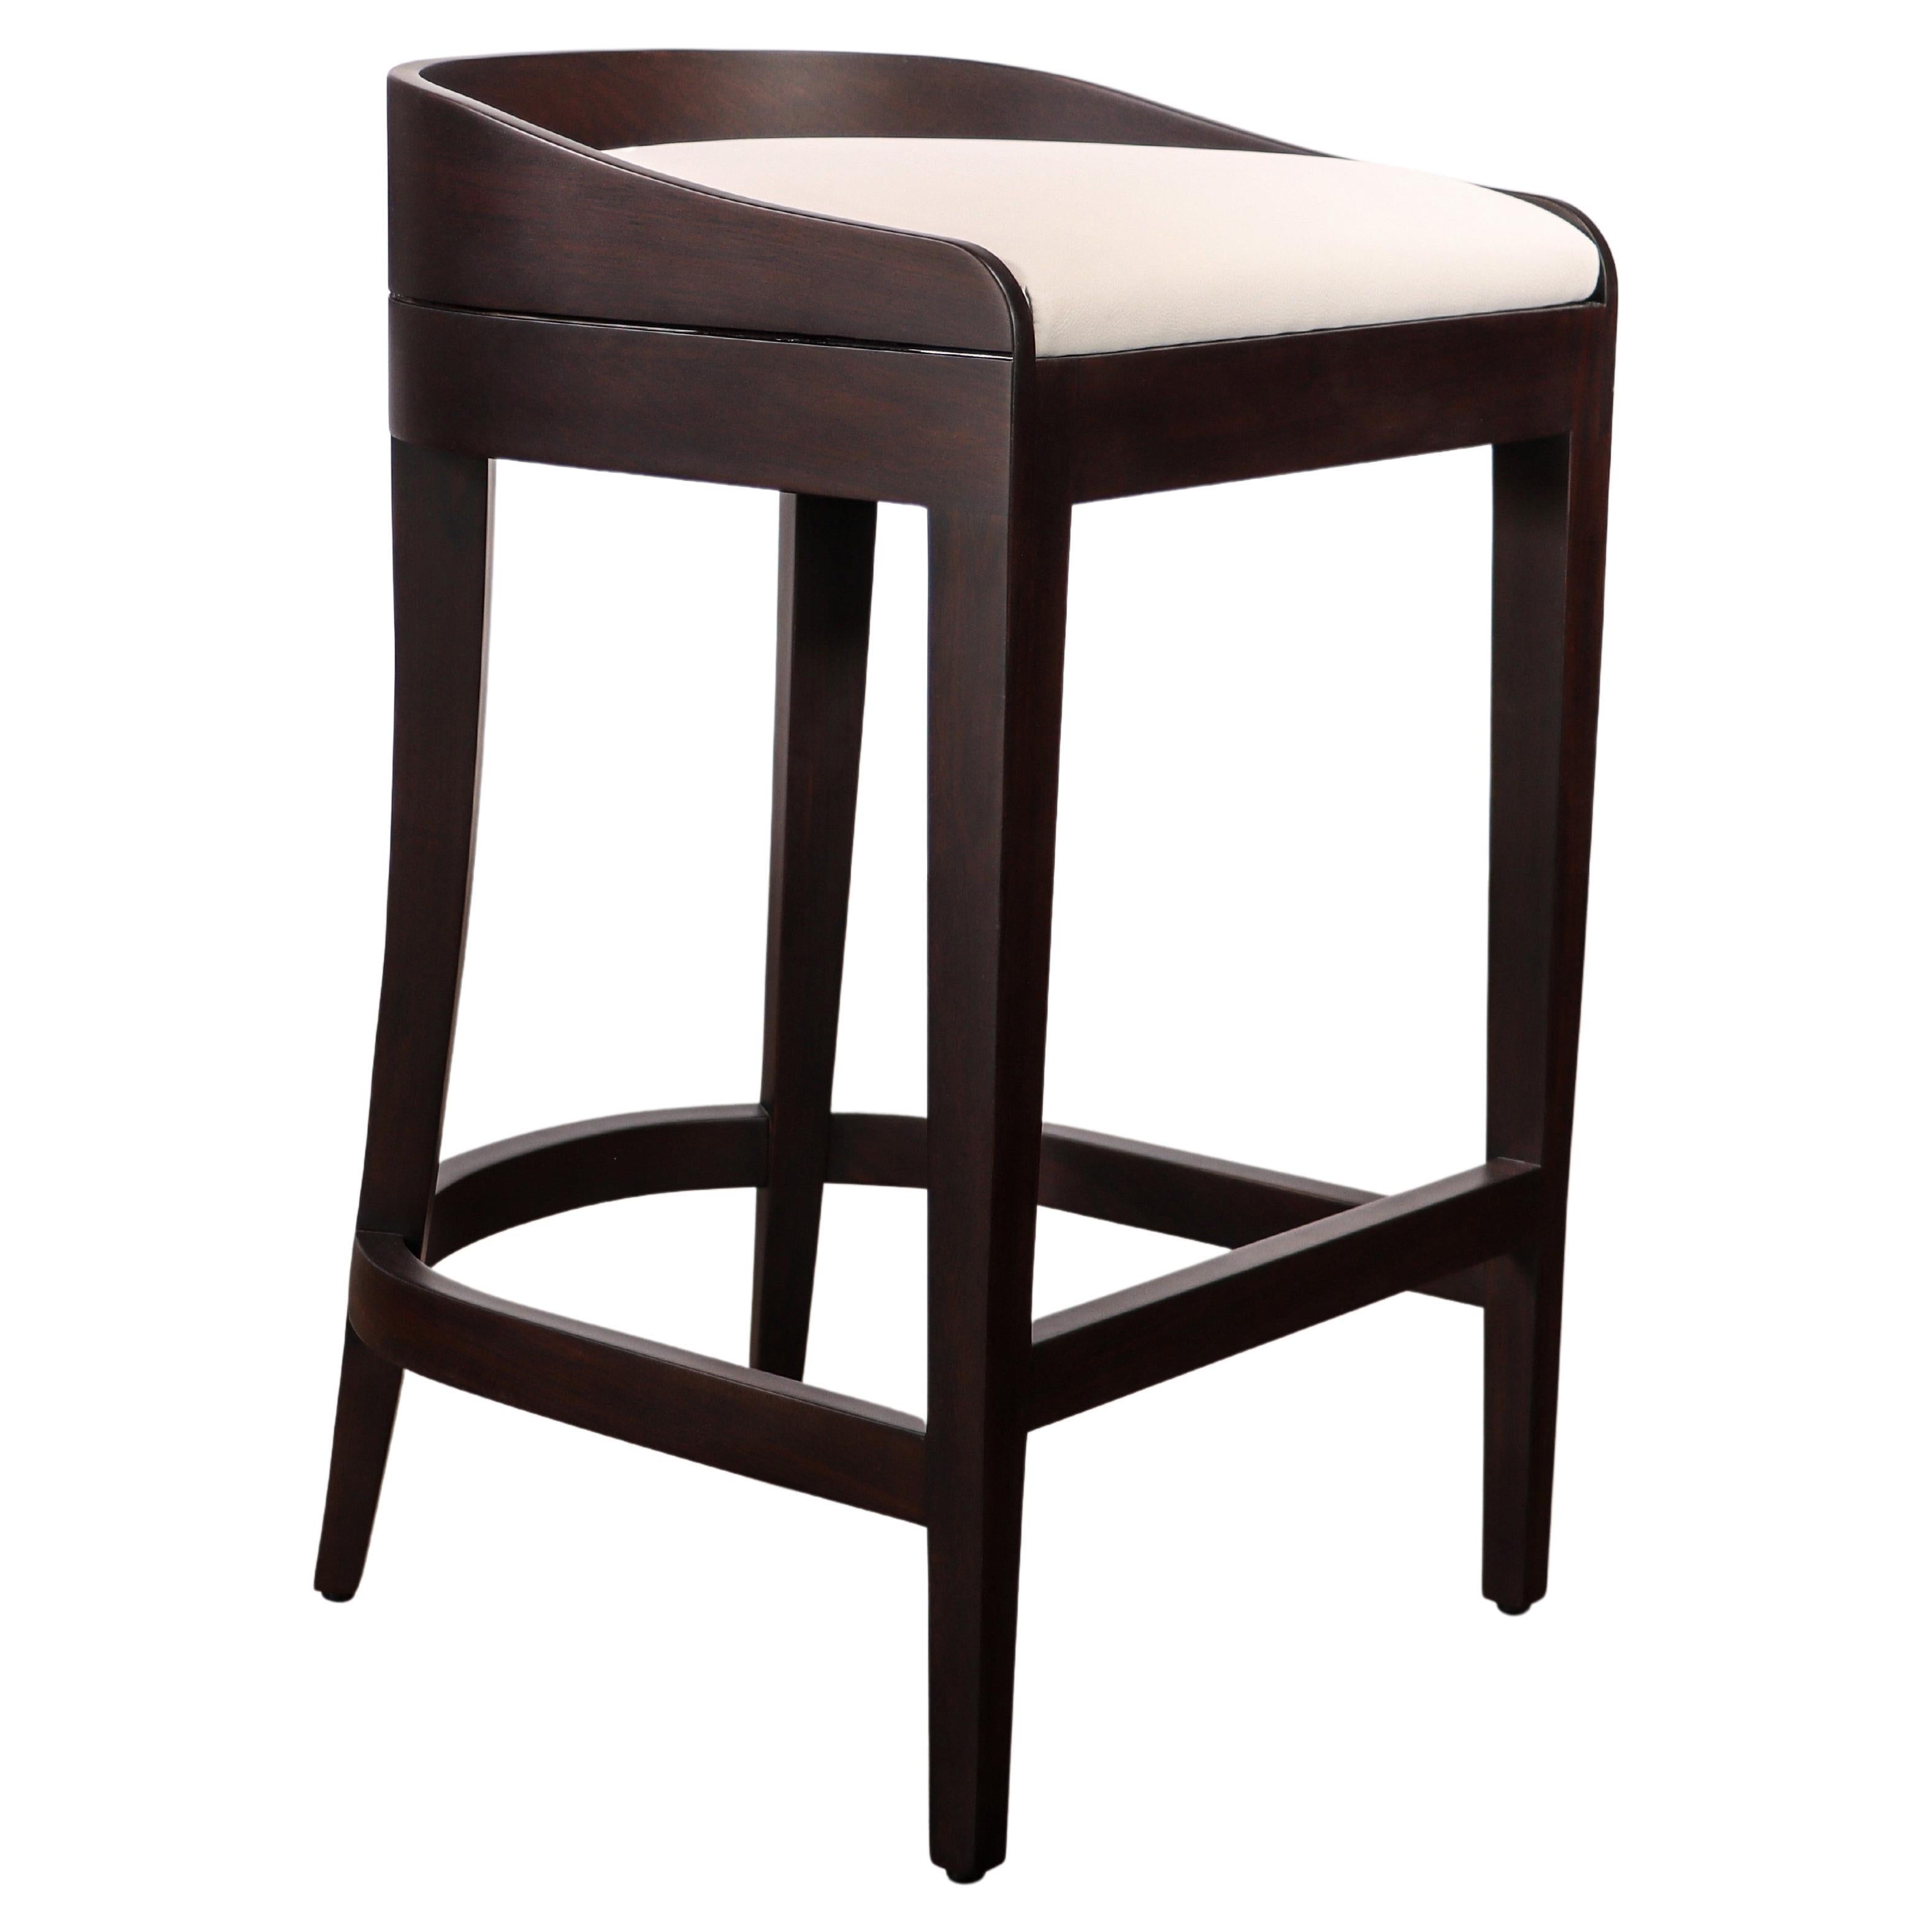 Exotic Contemporary Wood Stool with Wrapped Leather by Costantini, Pia